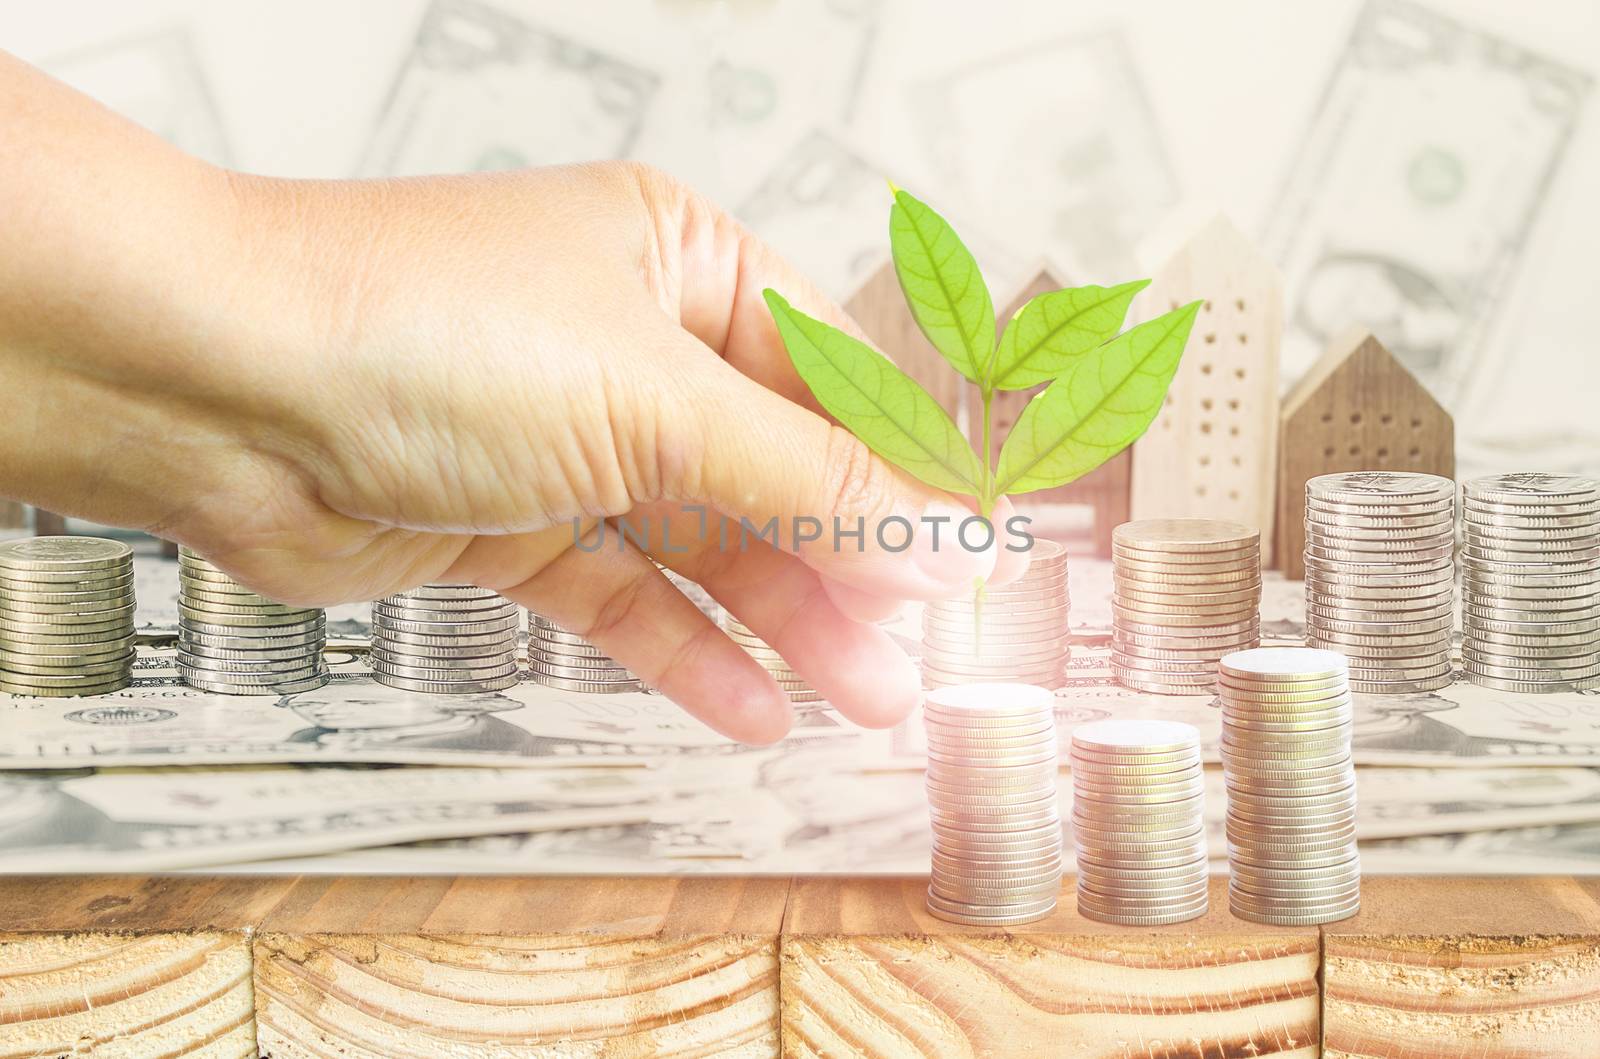 Close-Up Of Female Hand Pick Up The Leaf On The Coin With Dollar Banknote Blur Background ,Business Finance And Money Concept, Business Investment Growth Concept